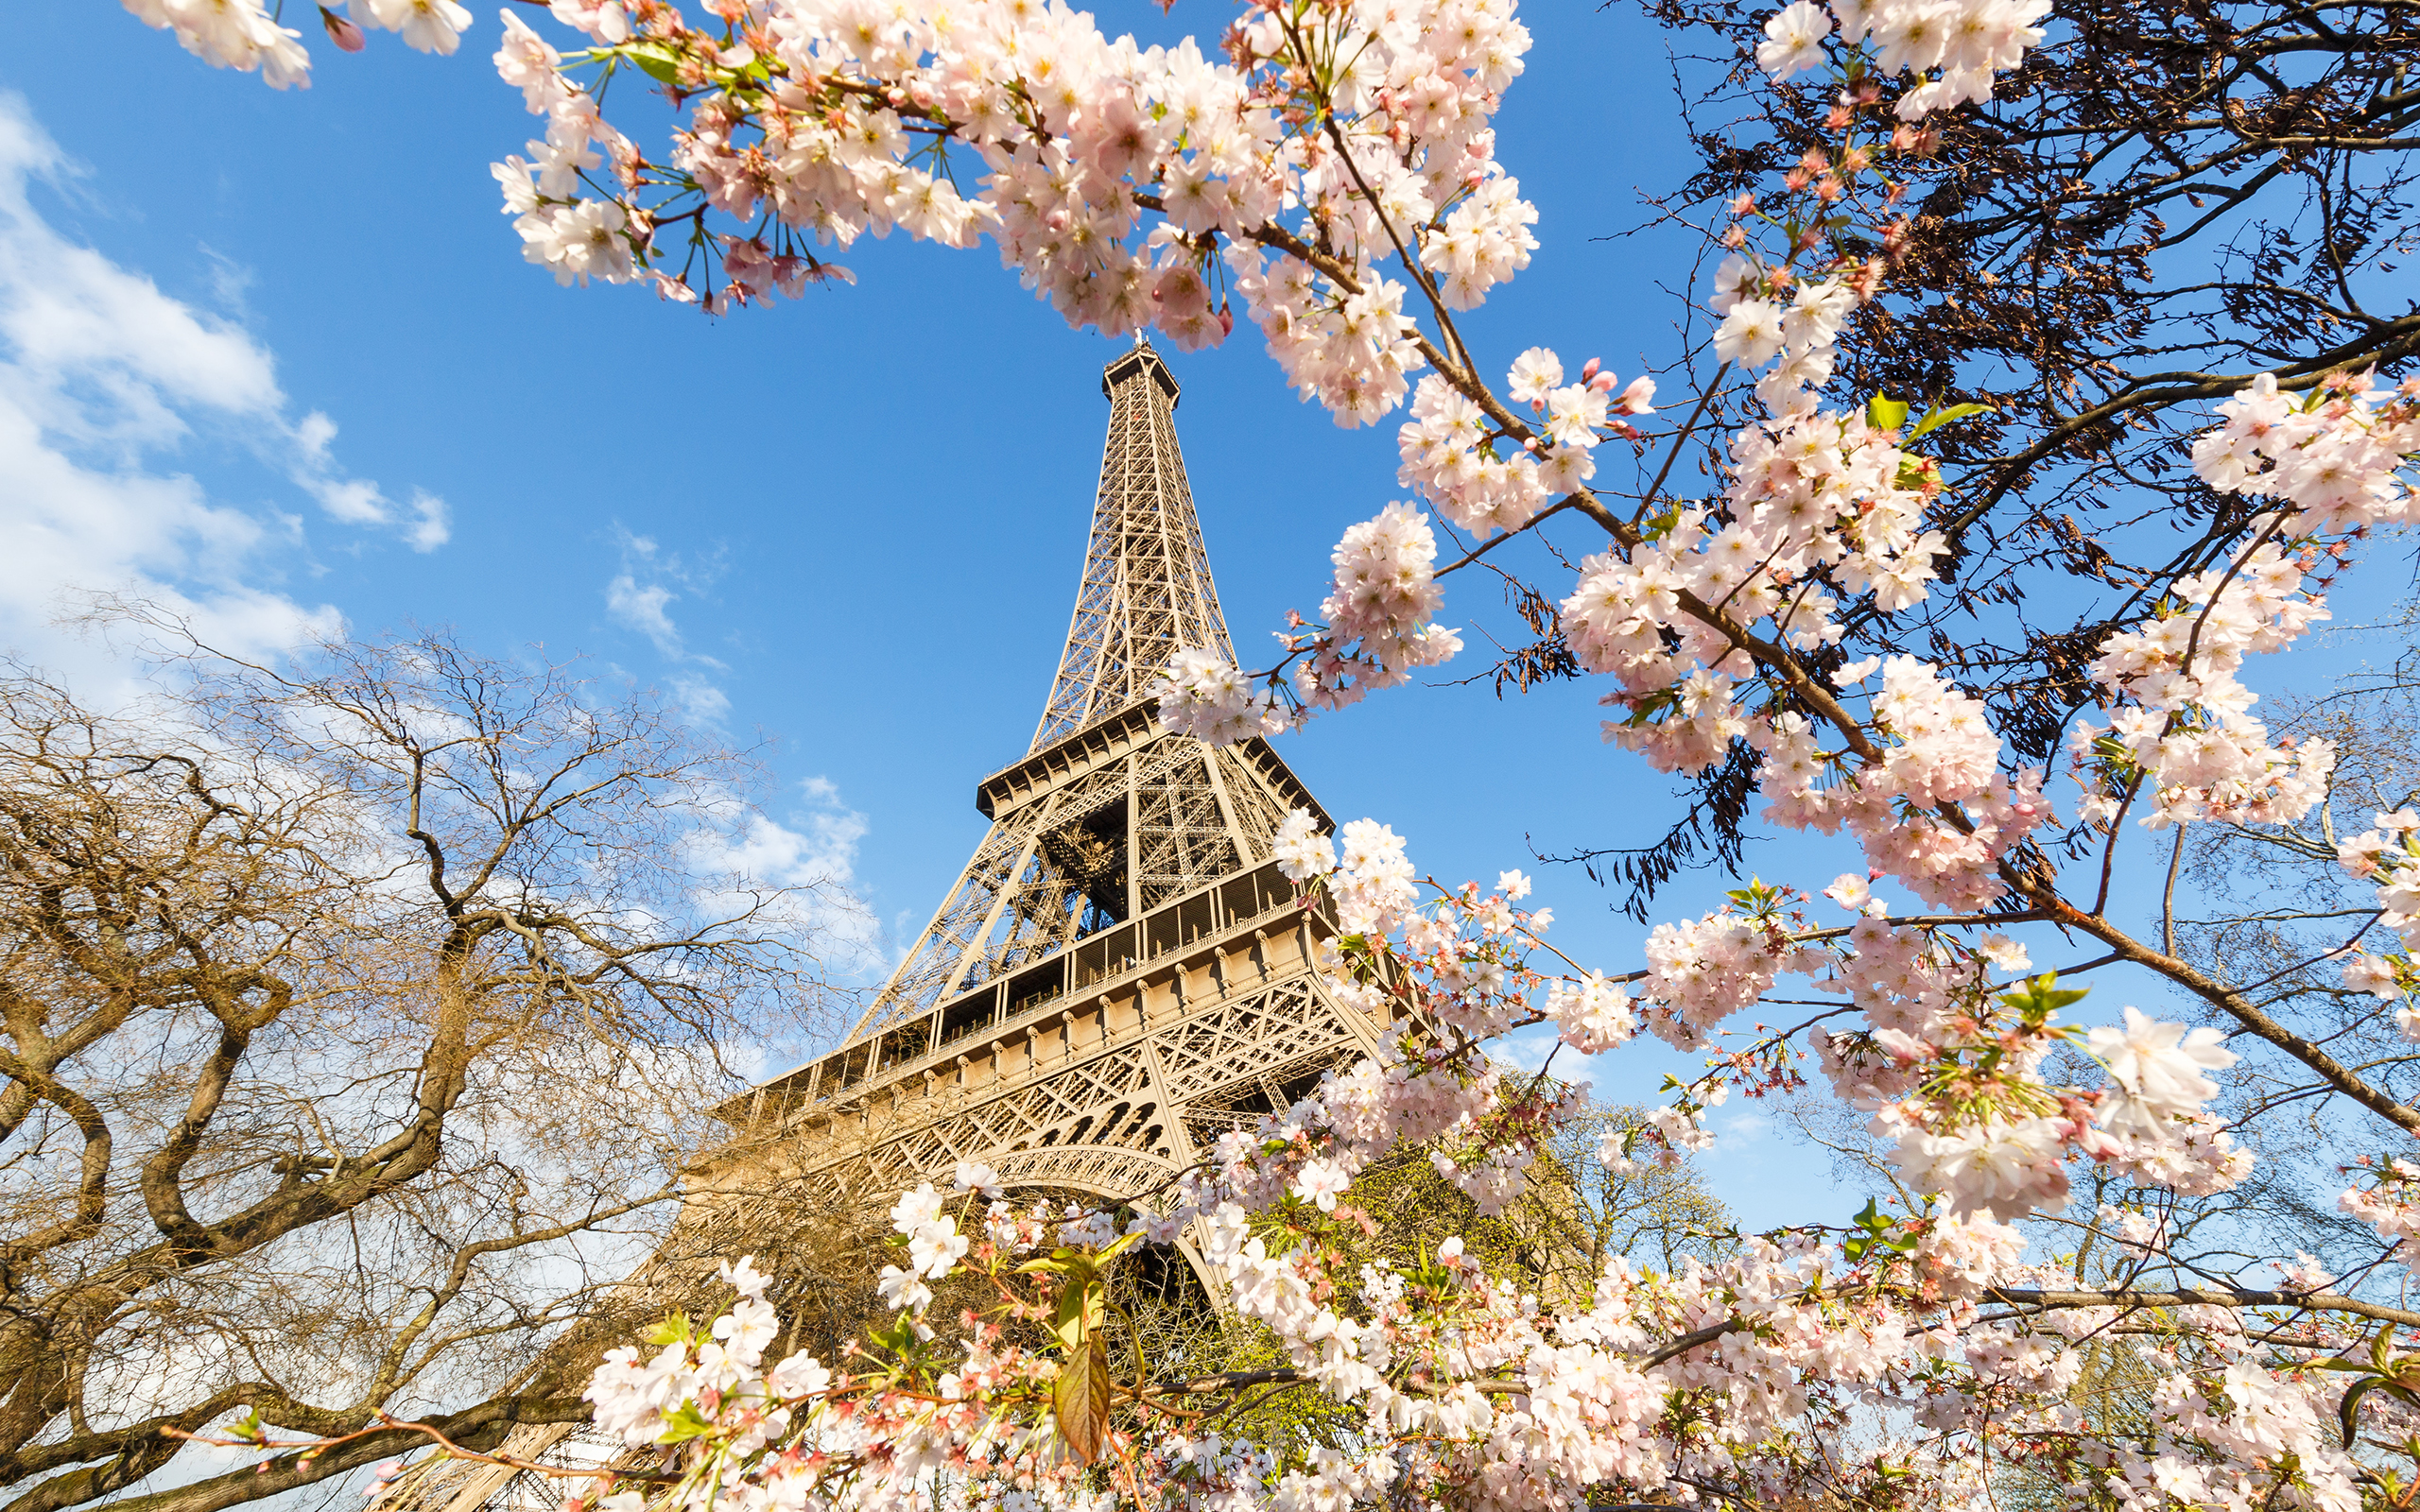 HD desktop wallpaper: Paris, Eiffel Tower, Monuments, France, Spring,  Monument, Blossom, Man Made, Pink Flower download free picture #382772